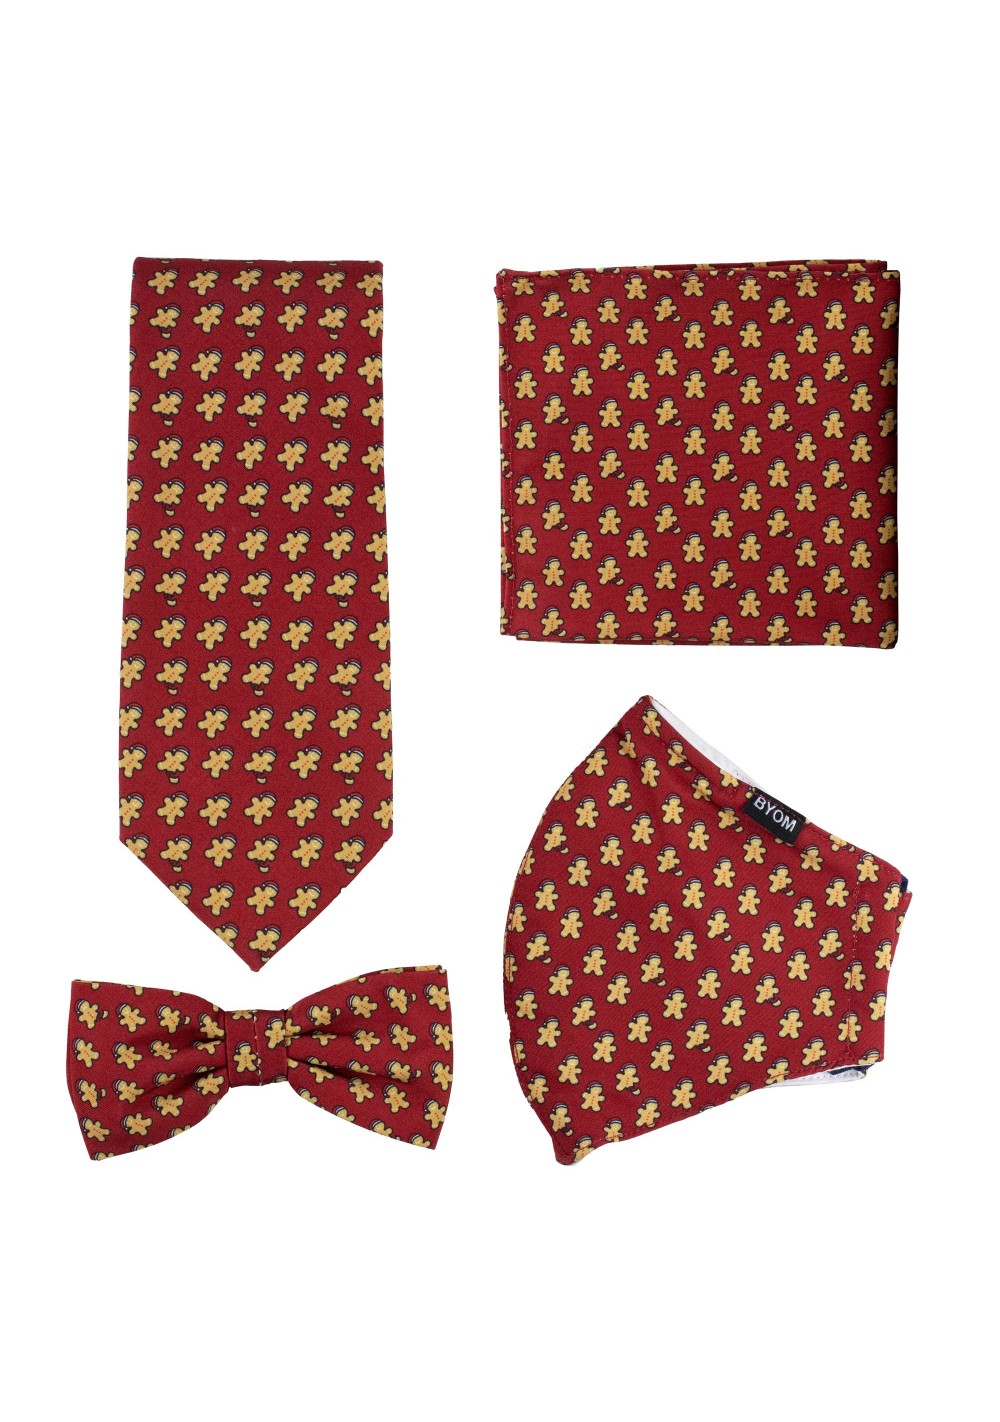 Mask and Tie Set with Gingerbread Man Print